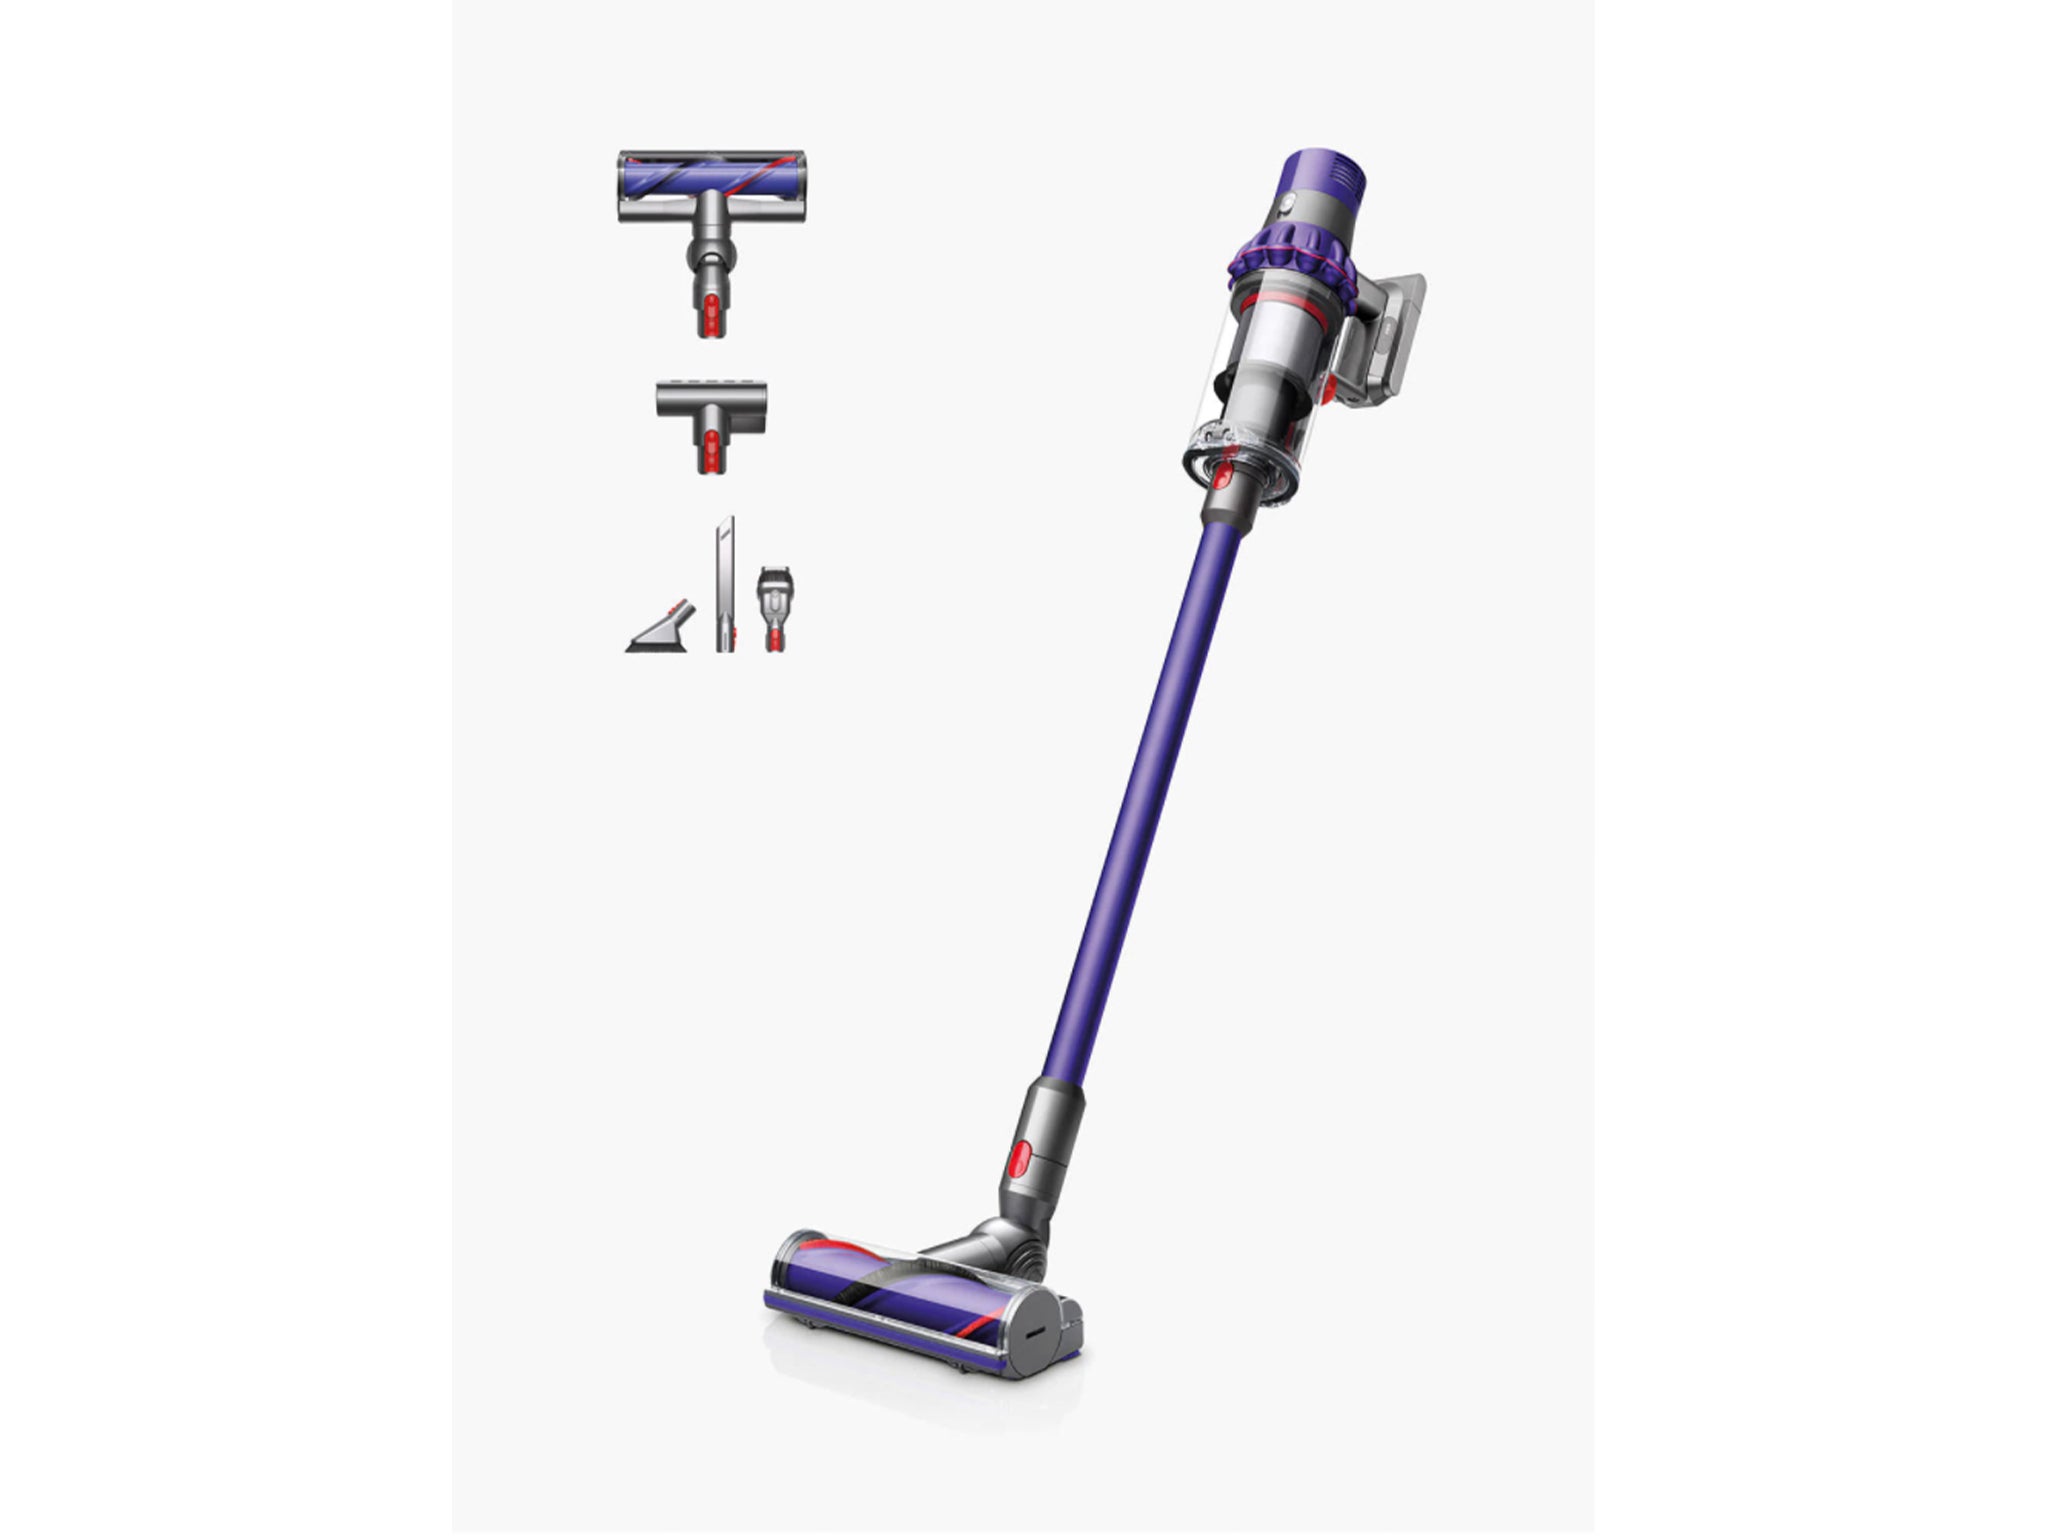 Making hoovering a breeze with this cordless machine